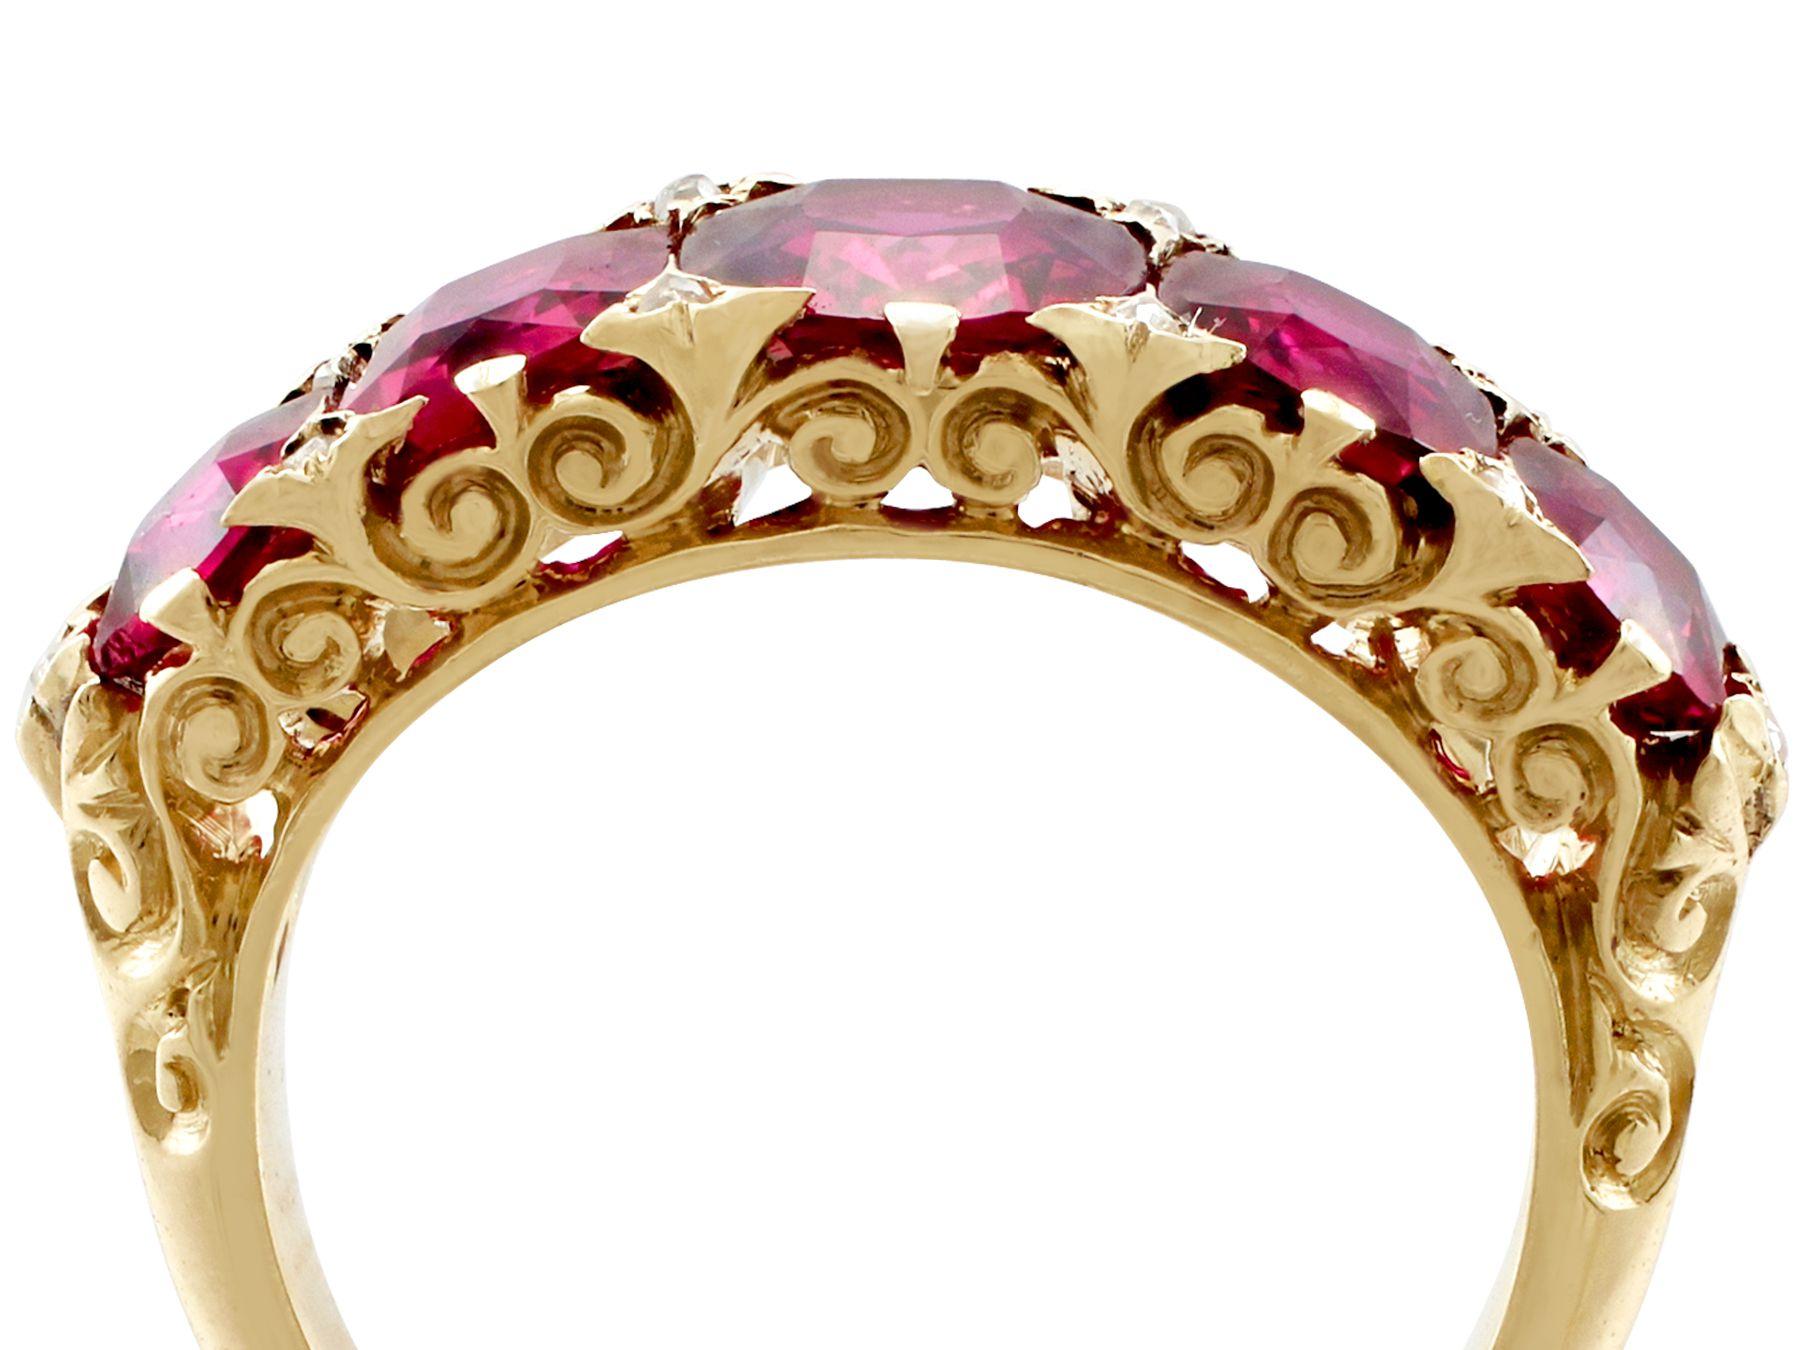 A stunning antique Victorian 3.54 carat natural ruby and 0.05 carat diamond, 18 karat yellow gold cocktail ring; part of our diverse antique jewelry estate jewelry collections.

This stunning, fine and impressive Victorian ruby ring has been crafted